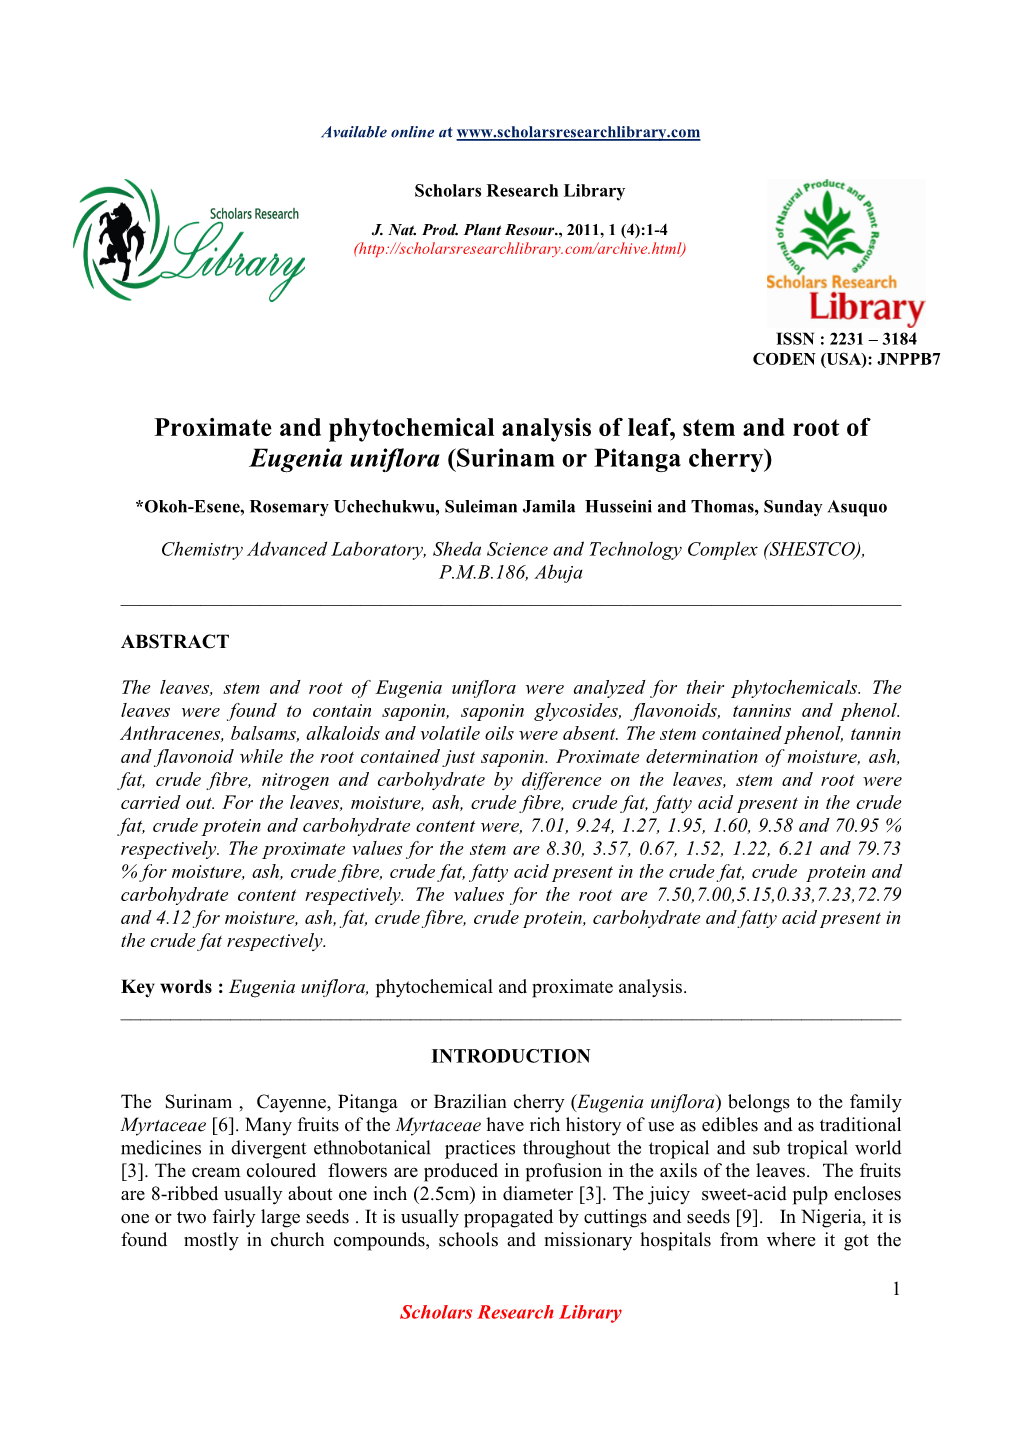 Proximate and Phytochemical Analysis of Leaf, Stem and Root of Eugenia Uniflora (Surinam Or Pitanga Cherry)